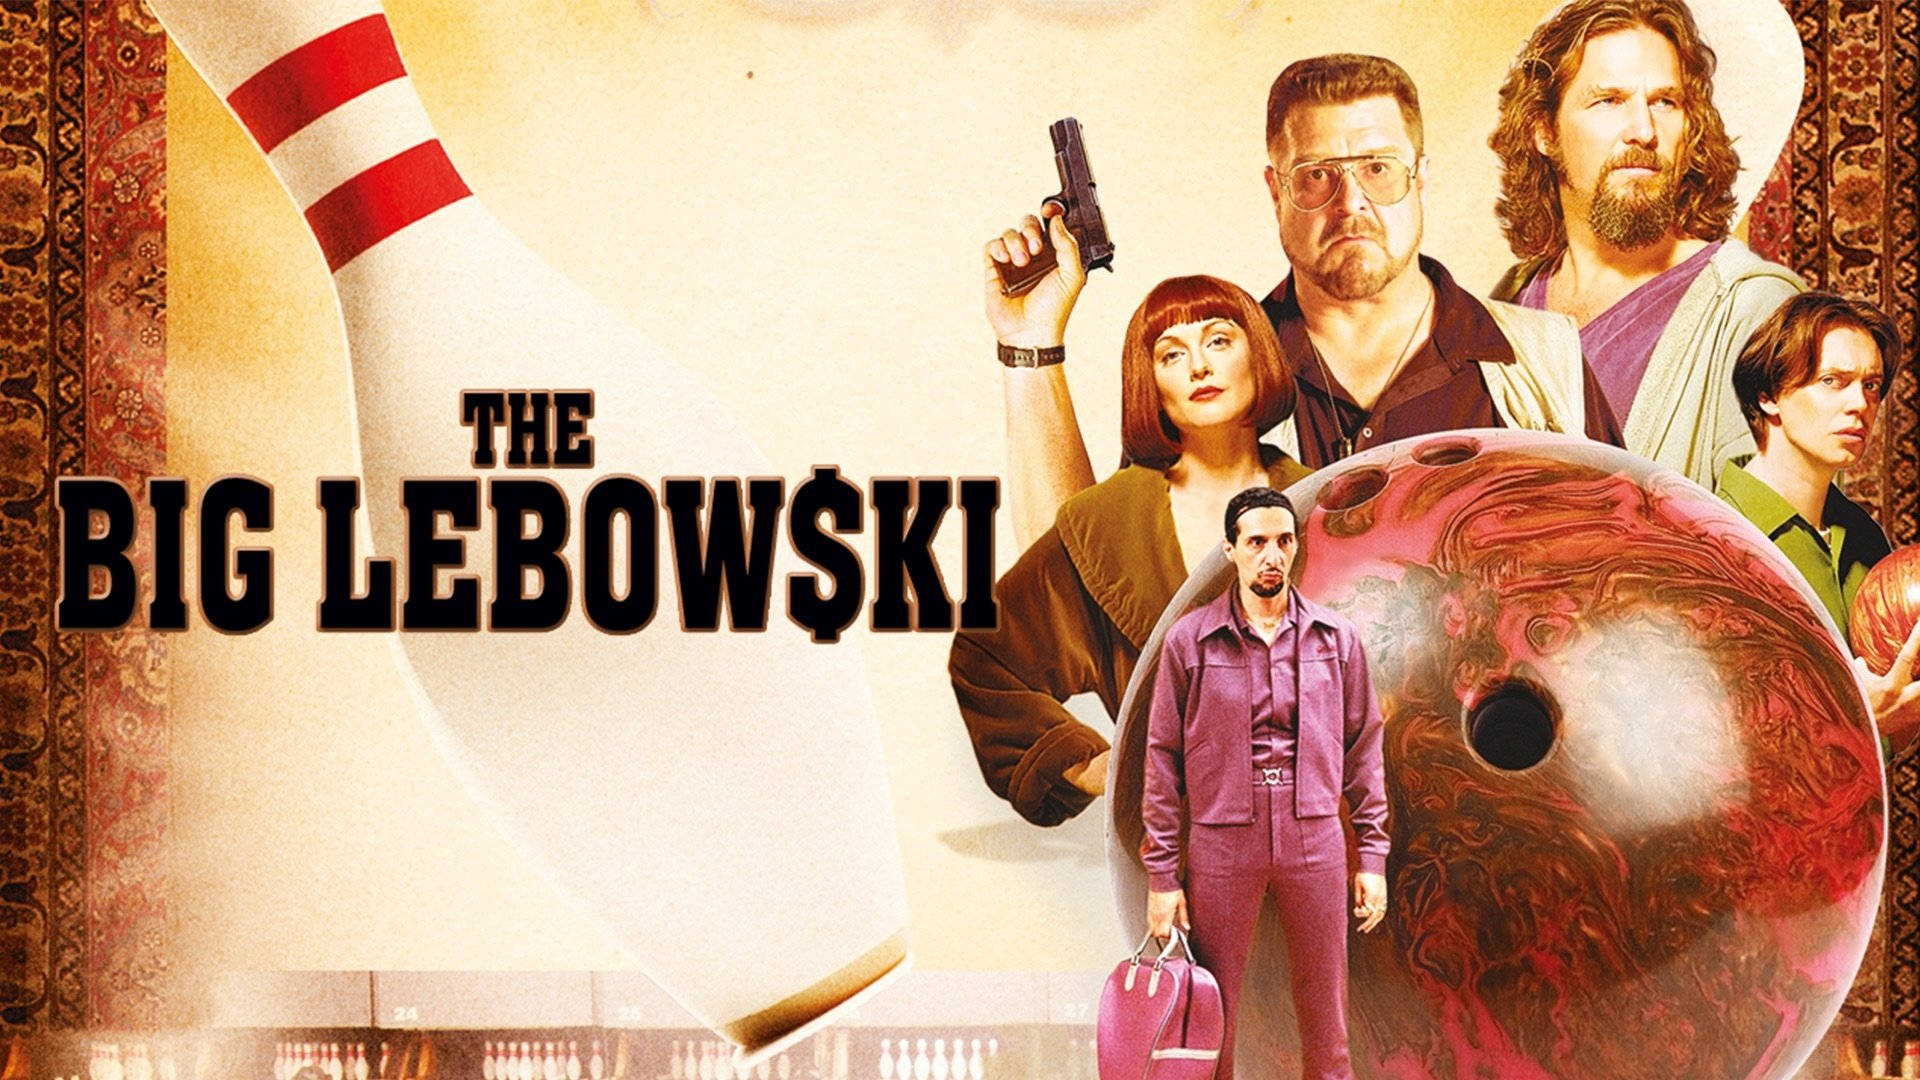 Iconic Movie Poster Of The Big Lebowski Featuring Main Characters.